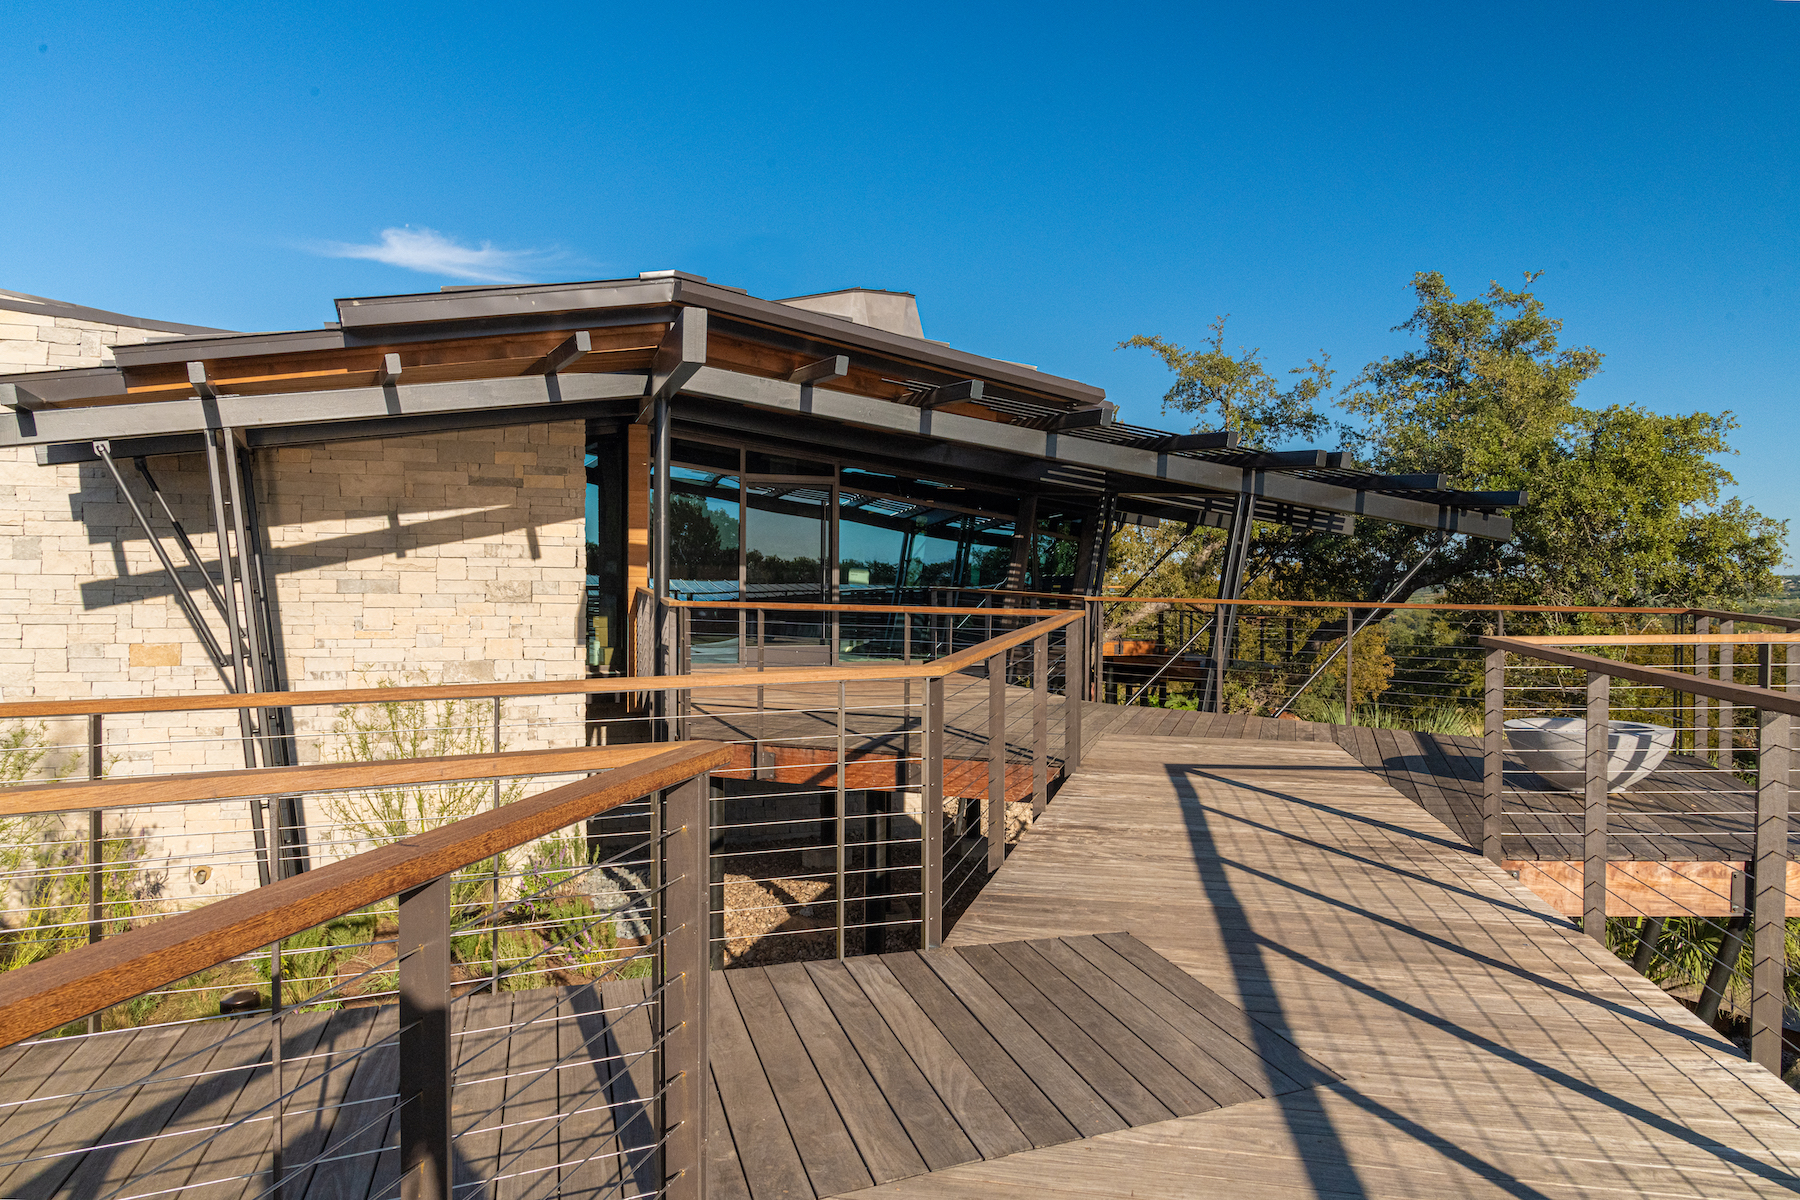 Texas Hill Country, a new clubhouse designed by the firm three at Horseshoe Bay Resort